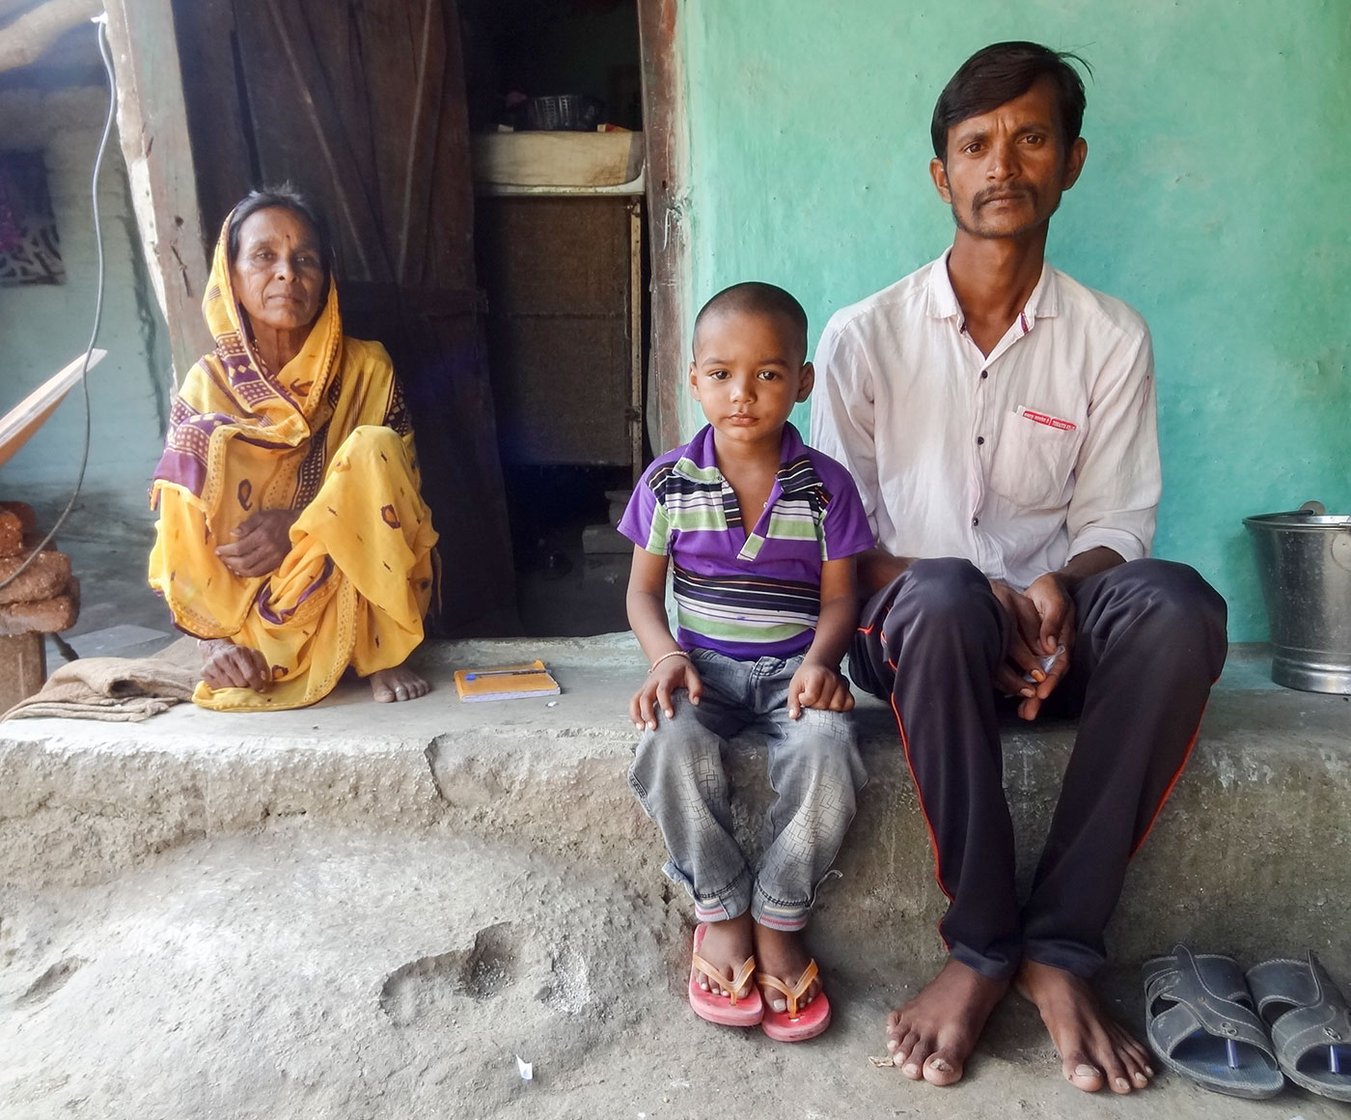 In Chahand village of Ralegaon tehsil, Archana Kulsanghe, 30, became an unusual victim in an elephant attack. The tragic story unfolded as one of the elephants deployed during Operation Avni, went berserk and fled from the base camp, only to trample two people, Archana being one of those. At her home, her husband Moreshwar sit grieving his wife’s demise, as his younger son Nachiket, clings on to him. The elephant trampled her when Archana was collecting the cow-dung in front of her hut near the cart; the Gajraj came from behind the neighbourer’s home, rammed into a toilet structure, and broke the shed built along the hut. After trampling Archana, it went to the neighbouring village of Pohana before it was reigned in. Purushottam’s mother Mandabai is sitting along the door of their hut